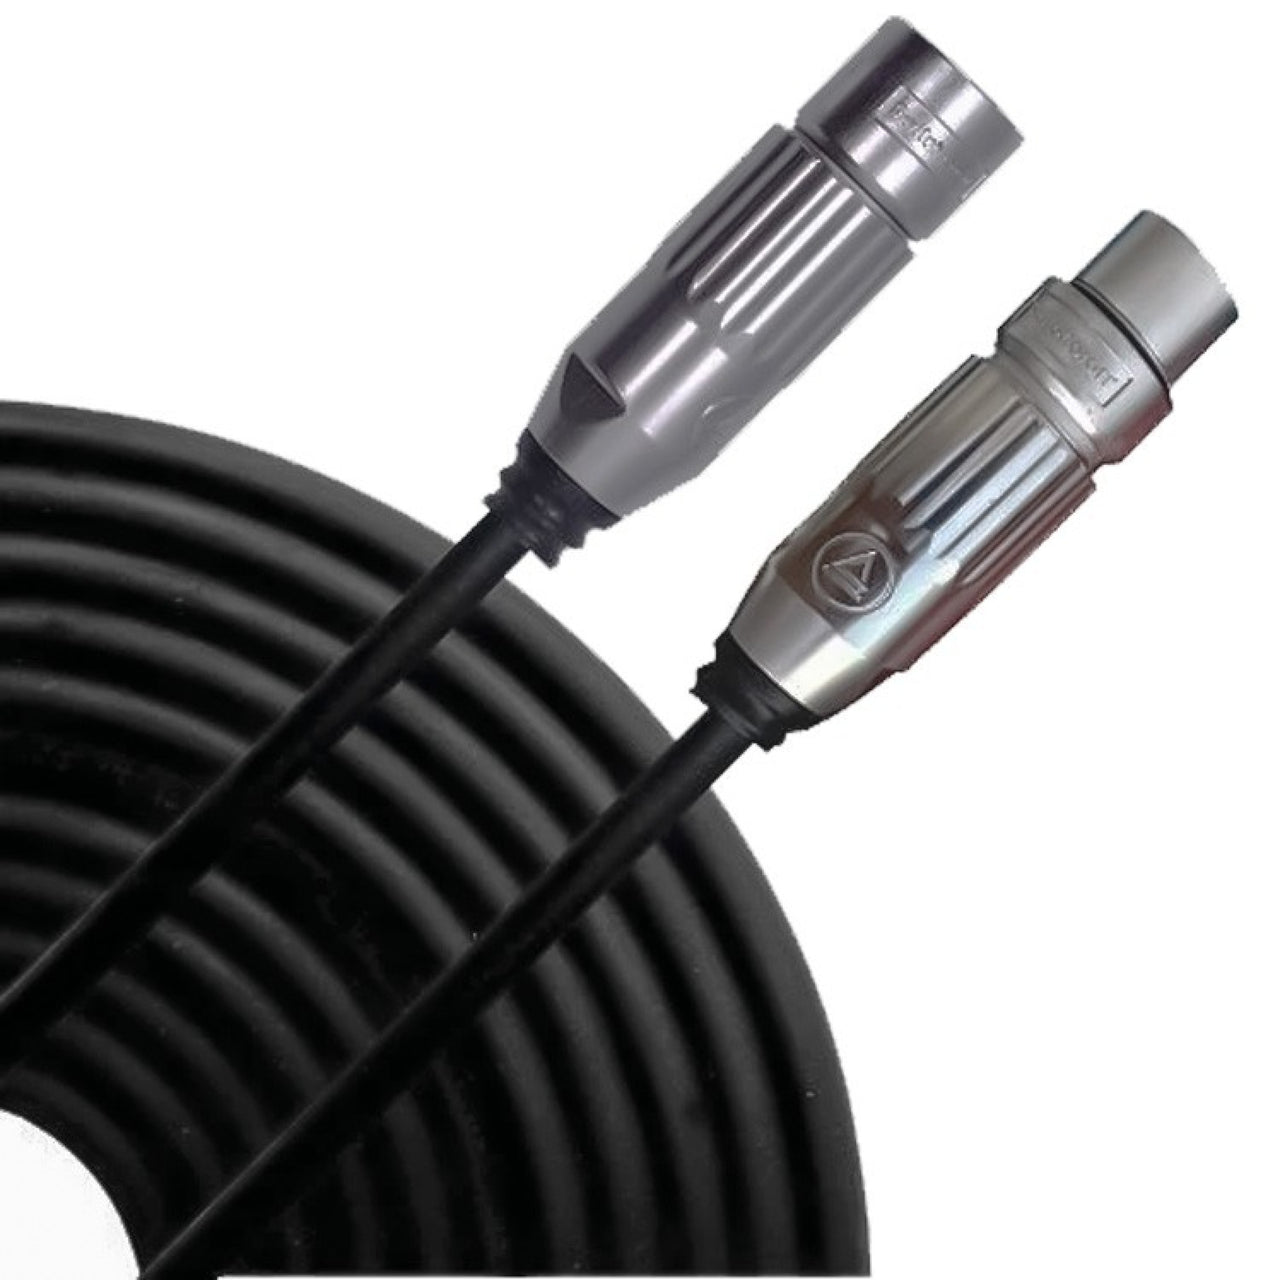 Cable Switchcraft P/Microfono Baja 15 Mts. 52bsw15